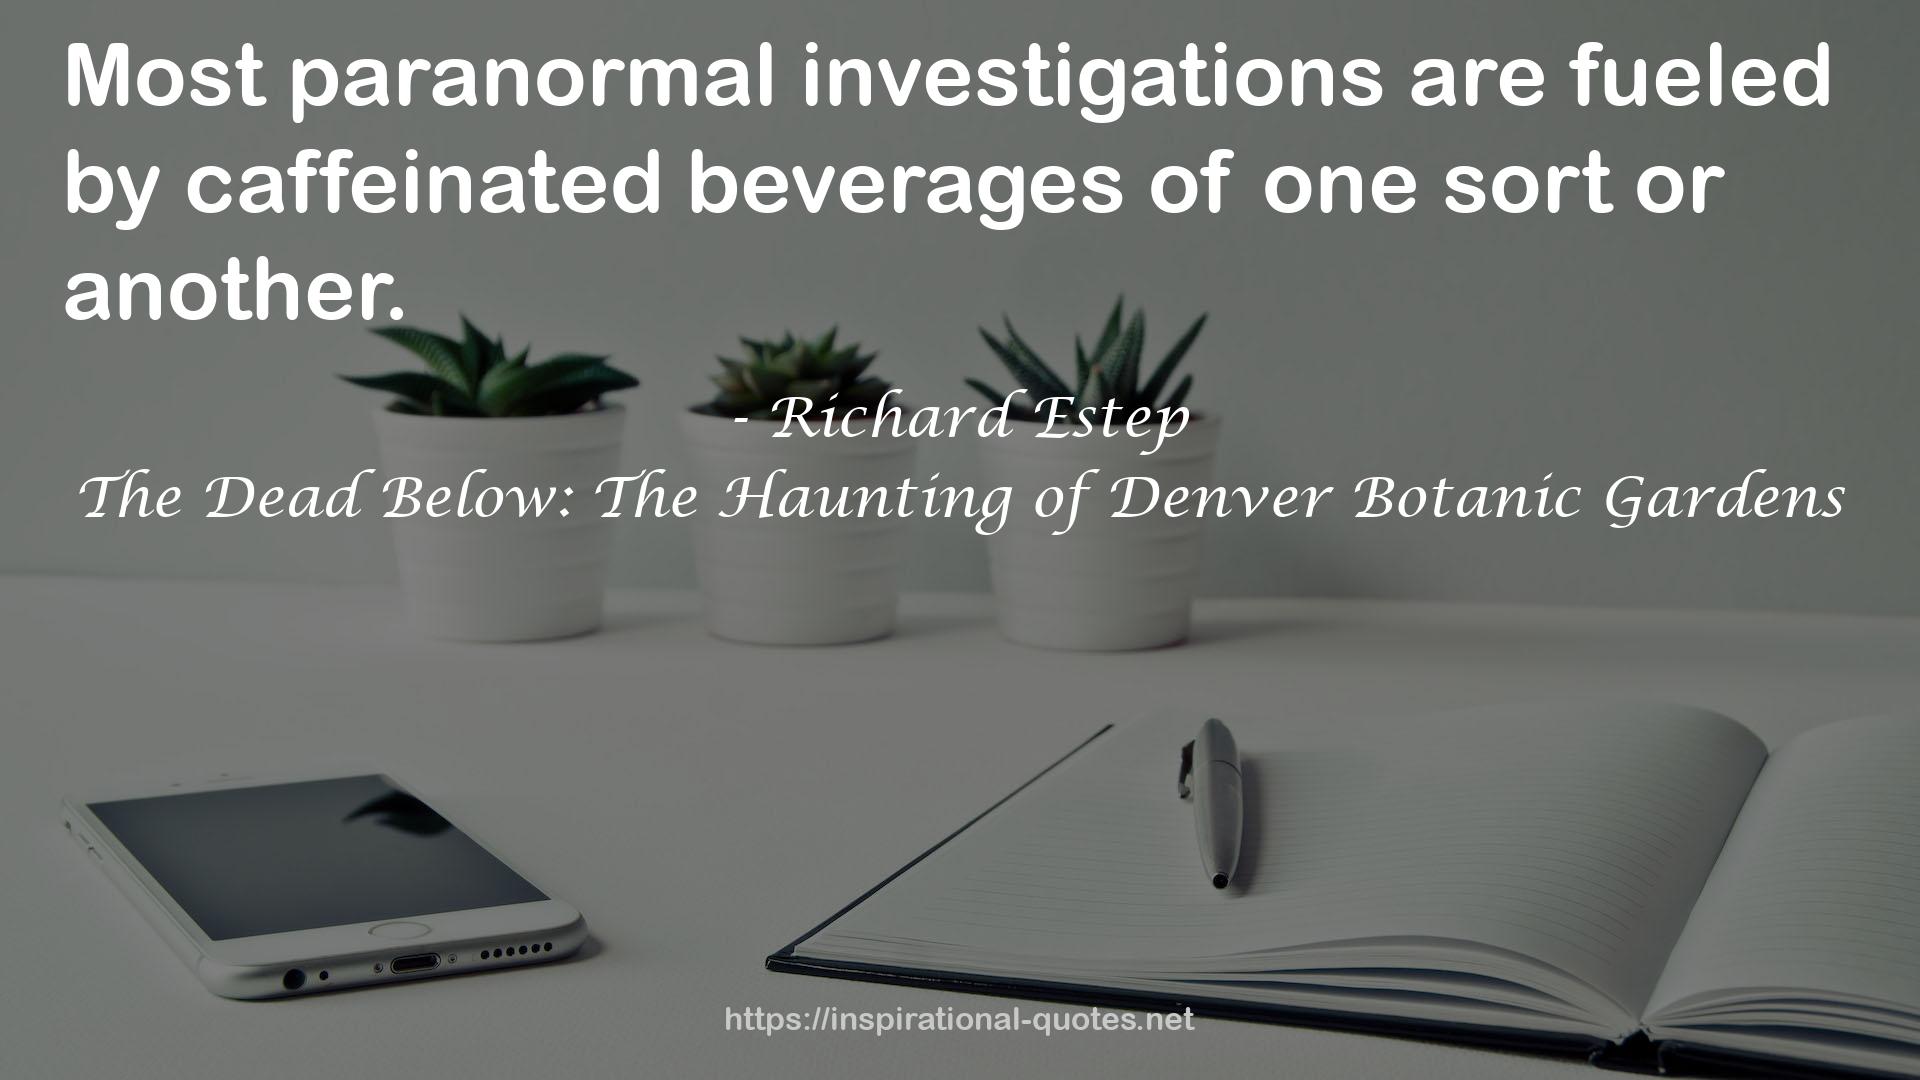 The Dead Below: The Haunting of Denver Botanic Gardens QUOTES